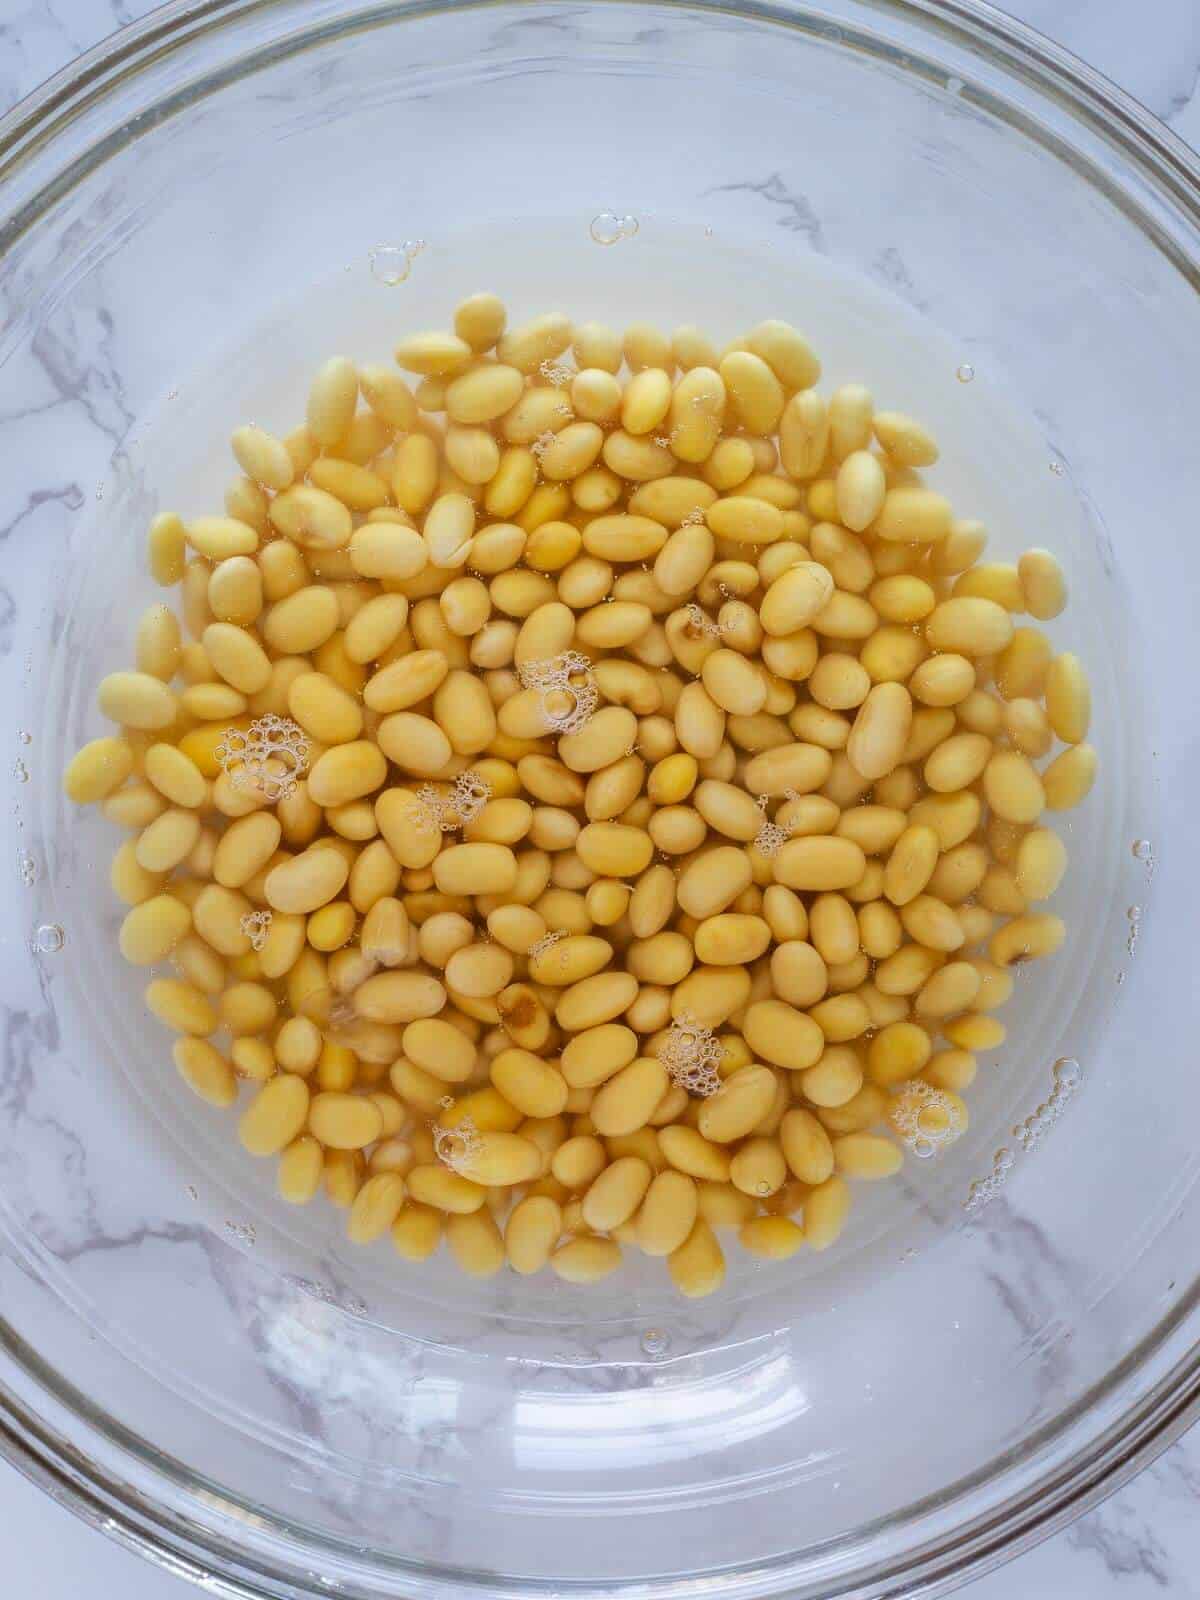 soaking soybeans in a bowl with water.